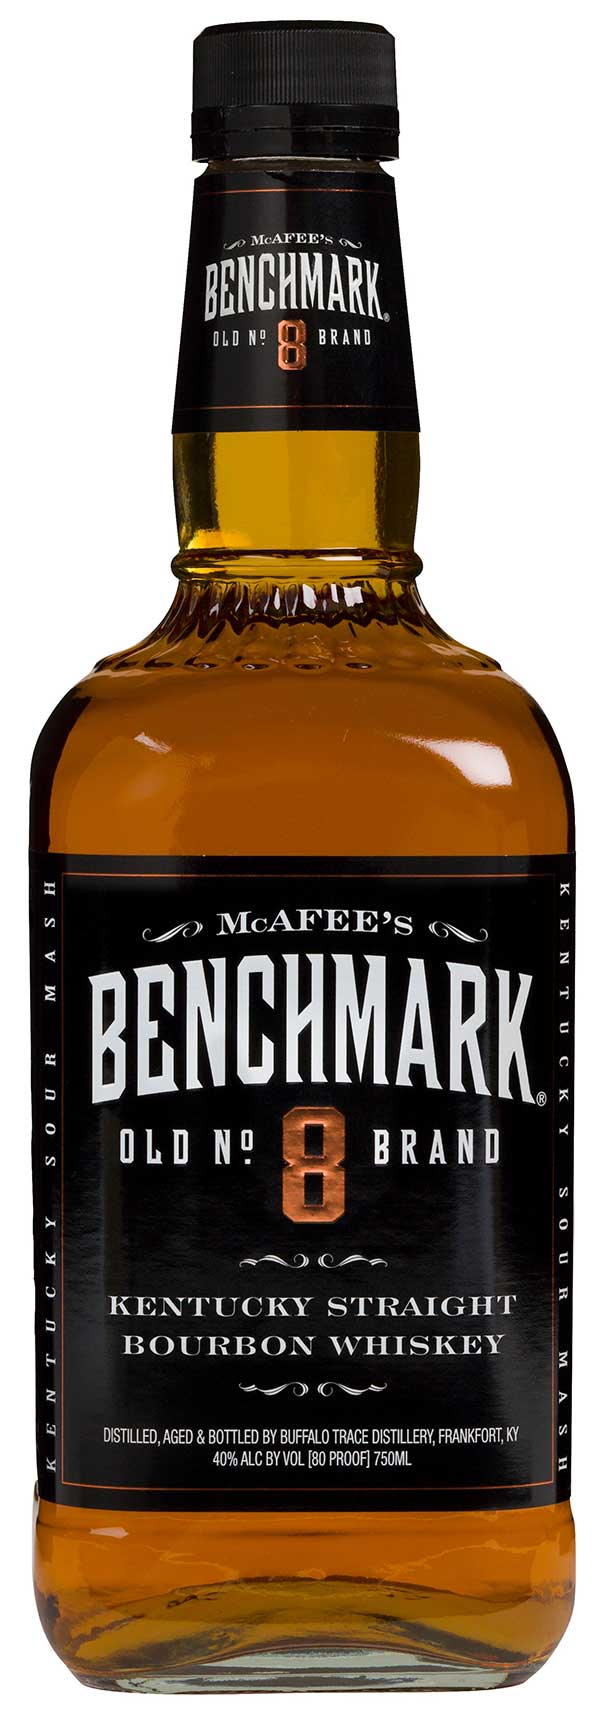 Photo of a bottle of Benchmark Old No. 8 Bourbon